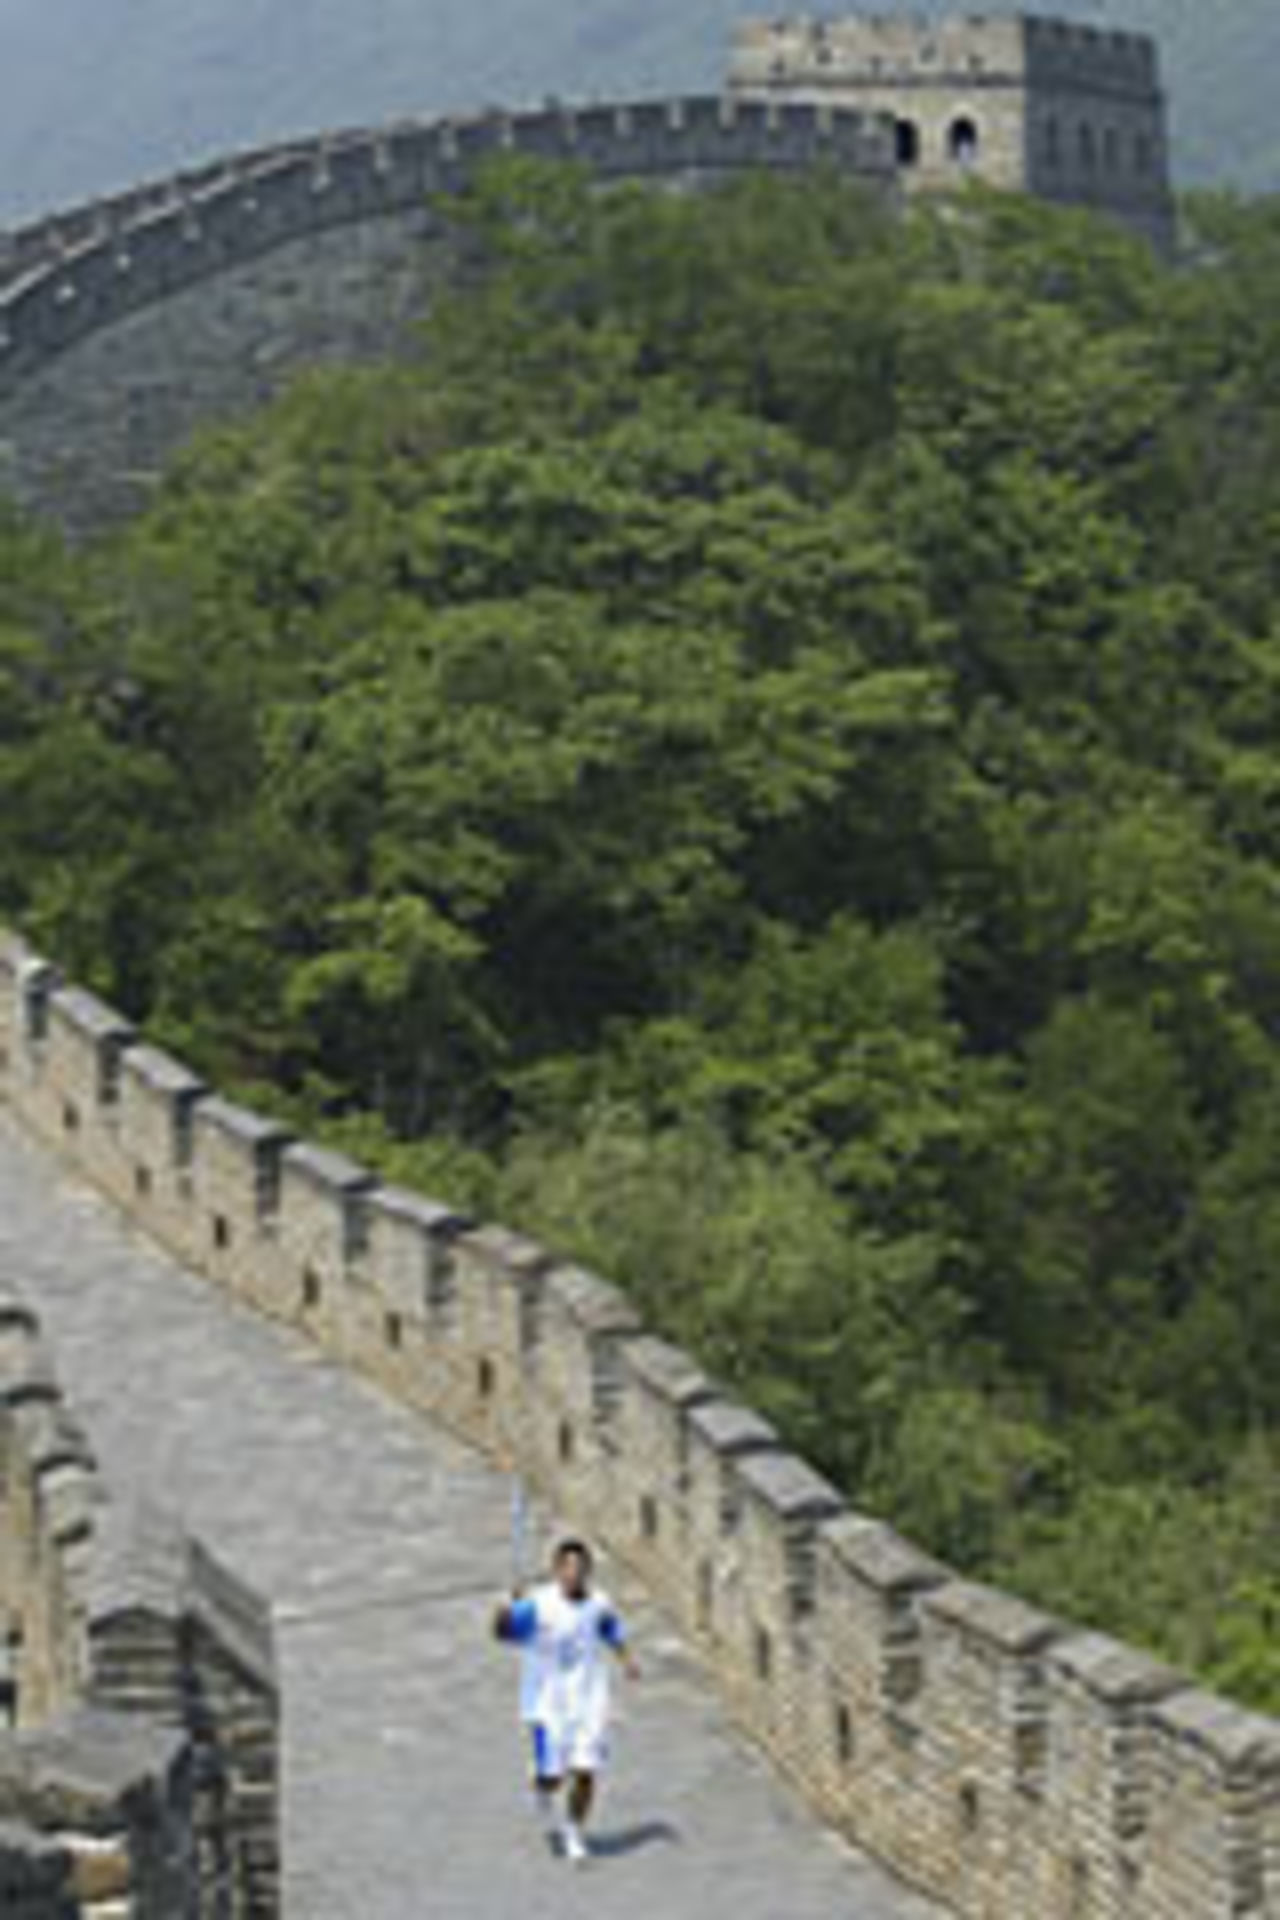 Runner carrying the Olympic flame on the Great Wall, June 2004